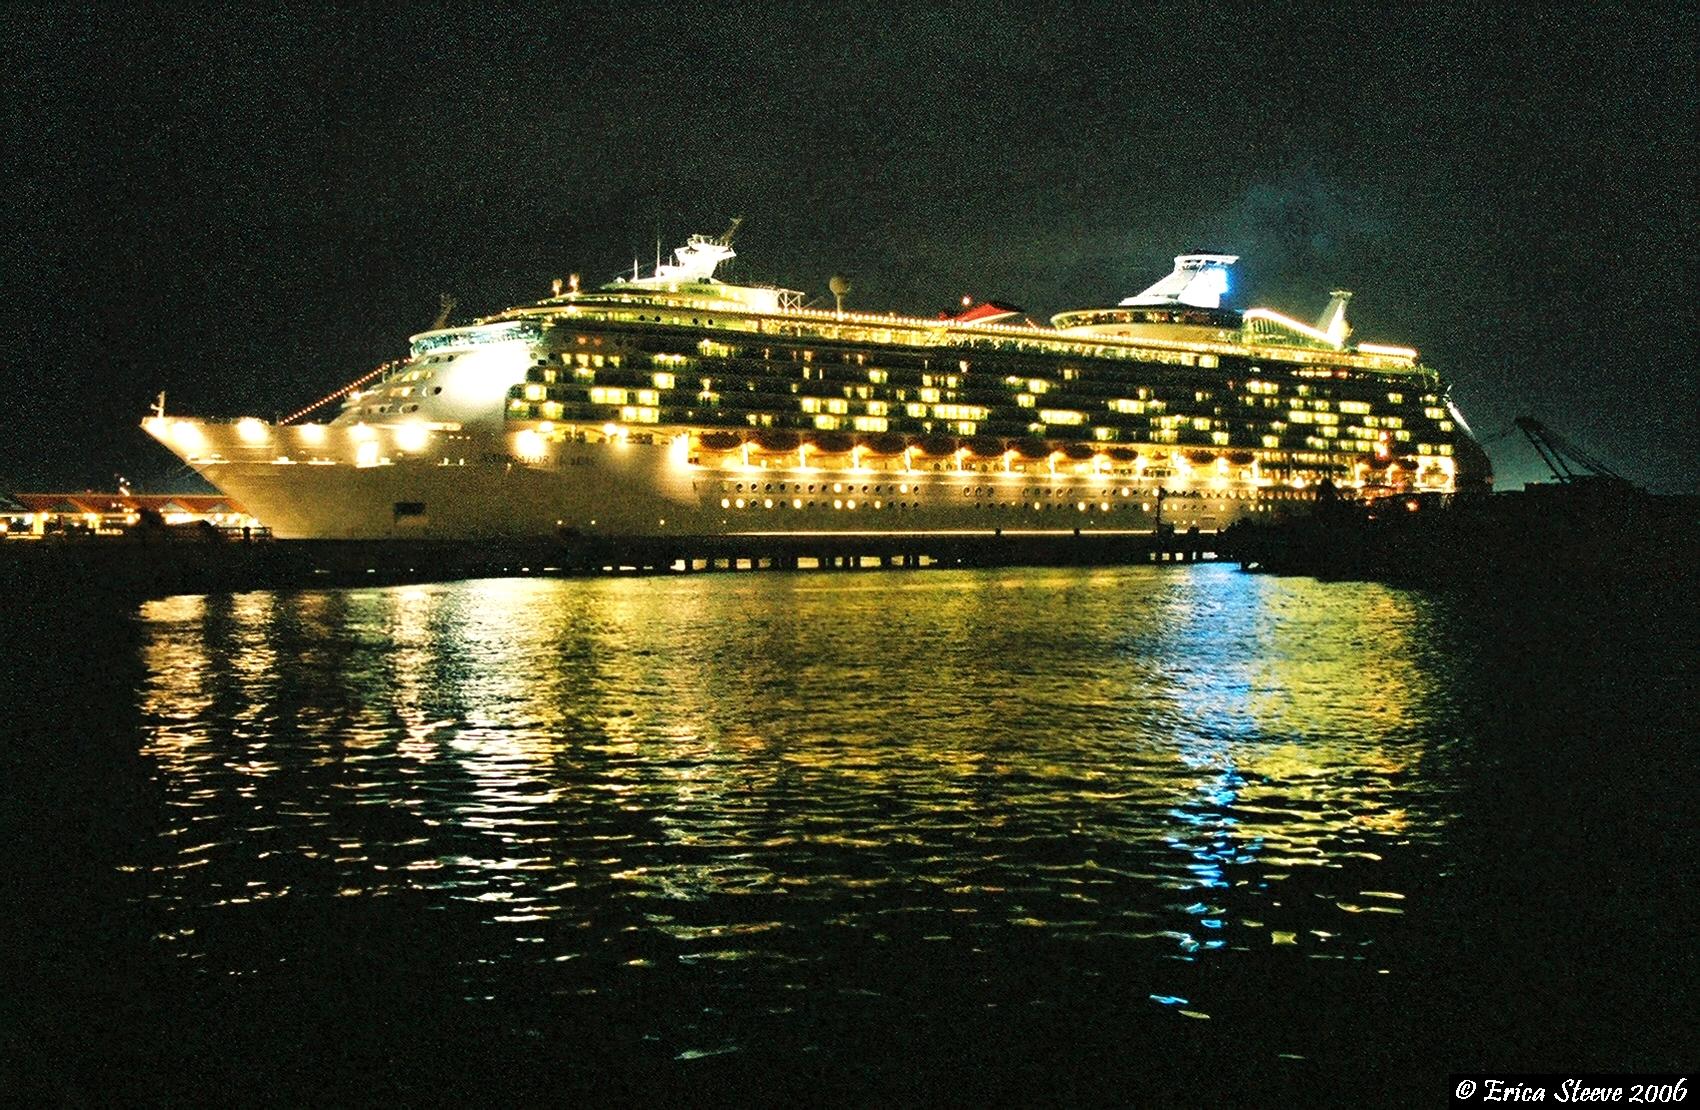 Our ship at night